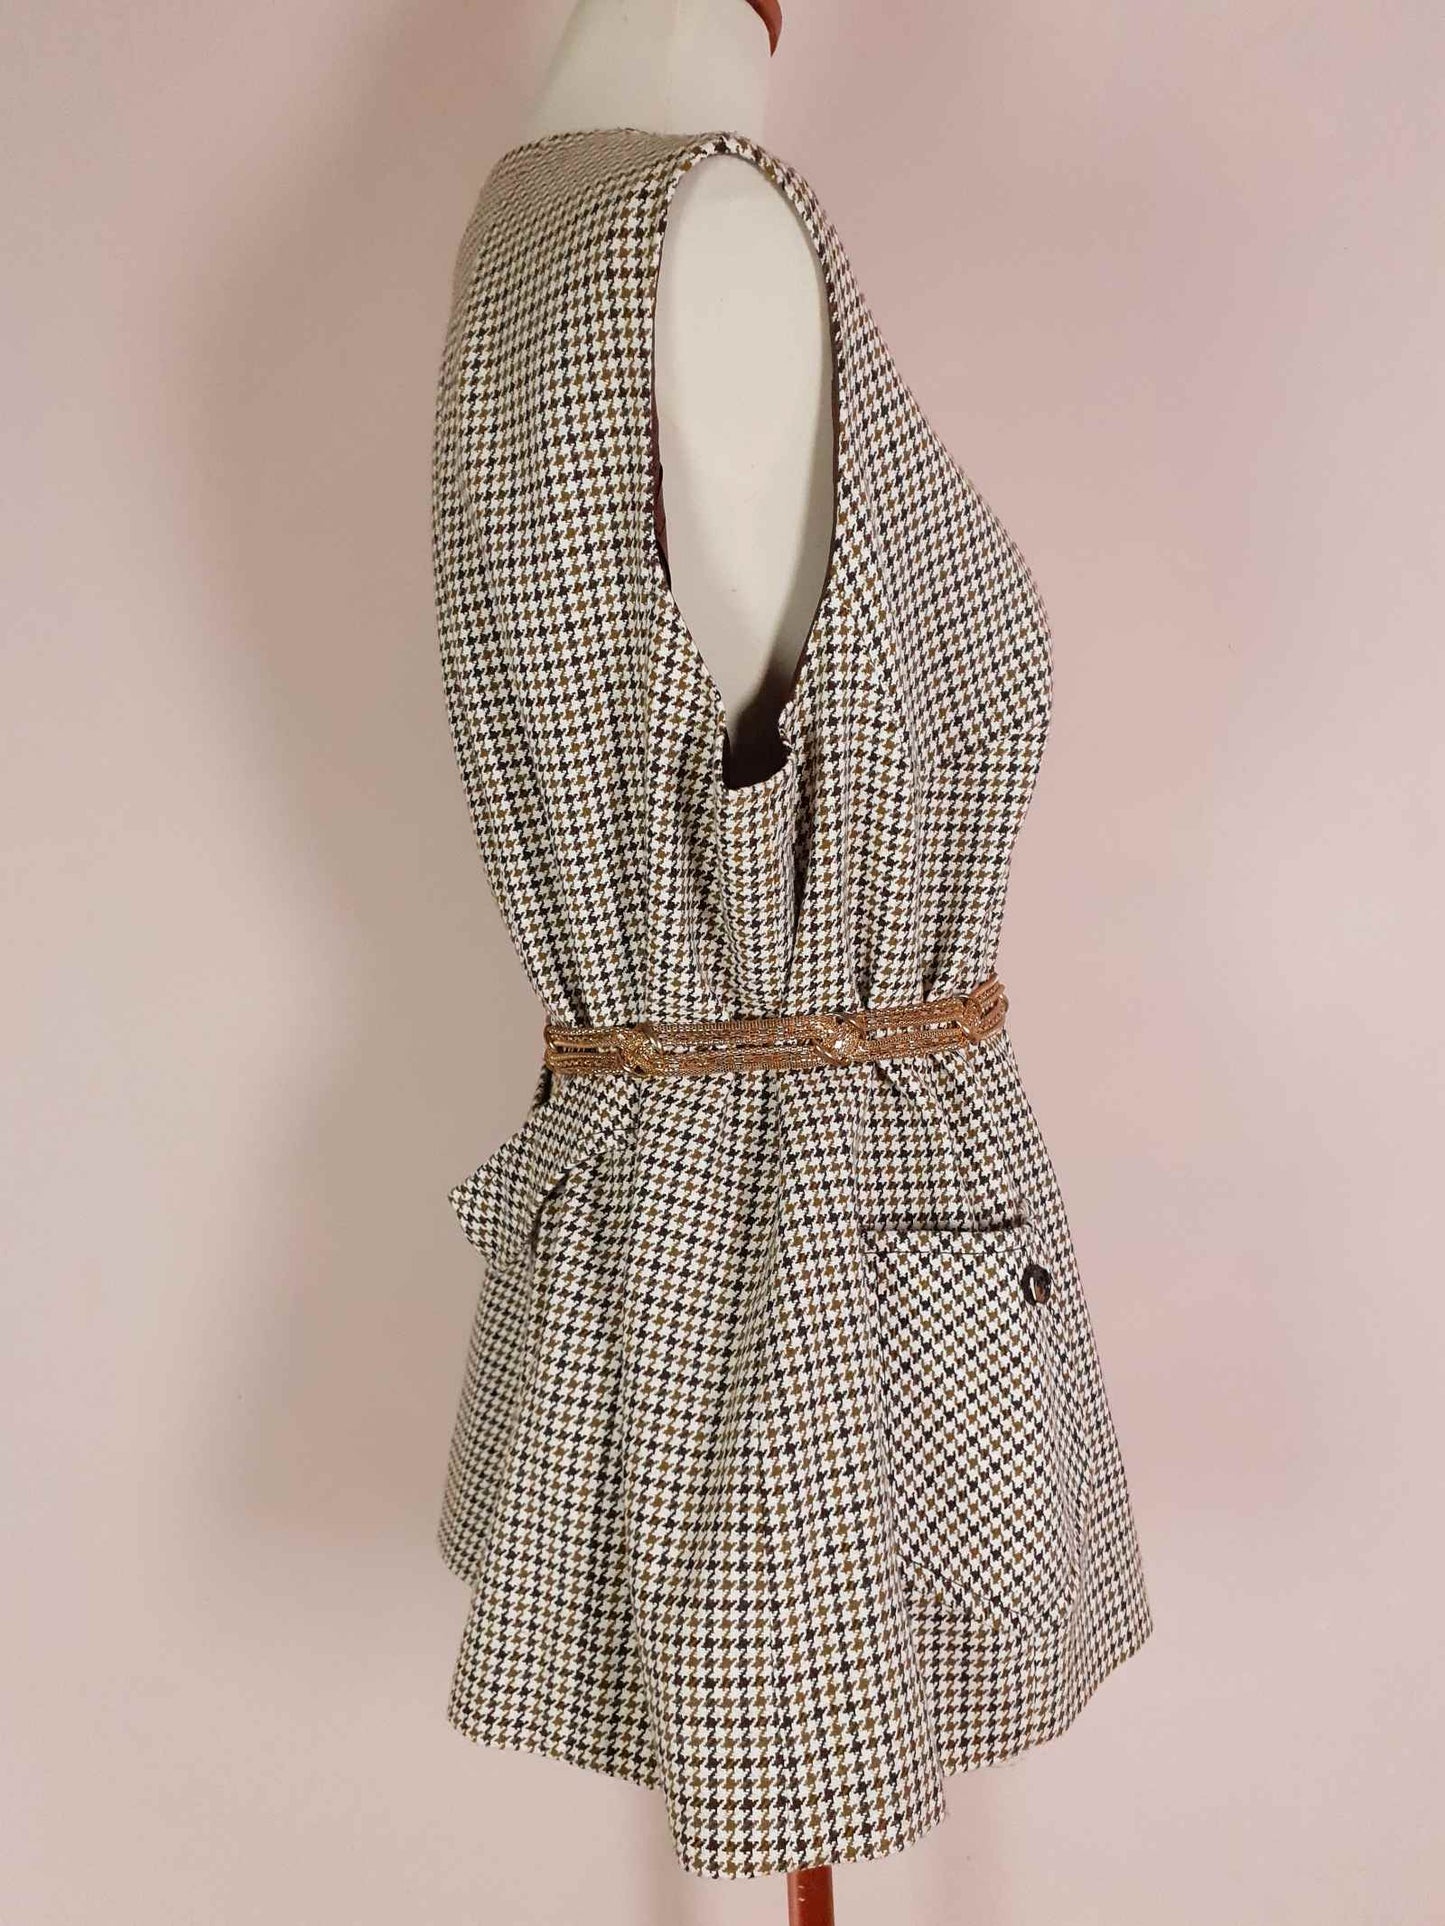 Vintage Wool Brown Houndstooth Waistcoat Check Vest Oversized 1980s - English Classics